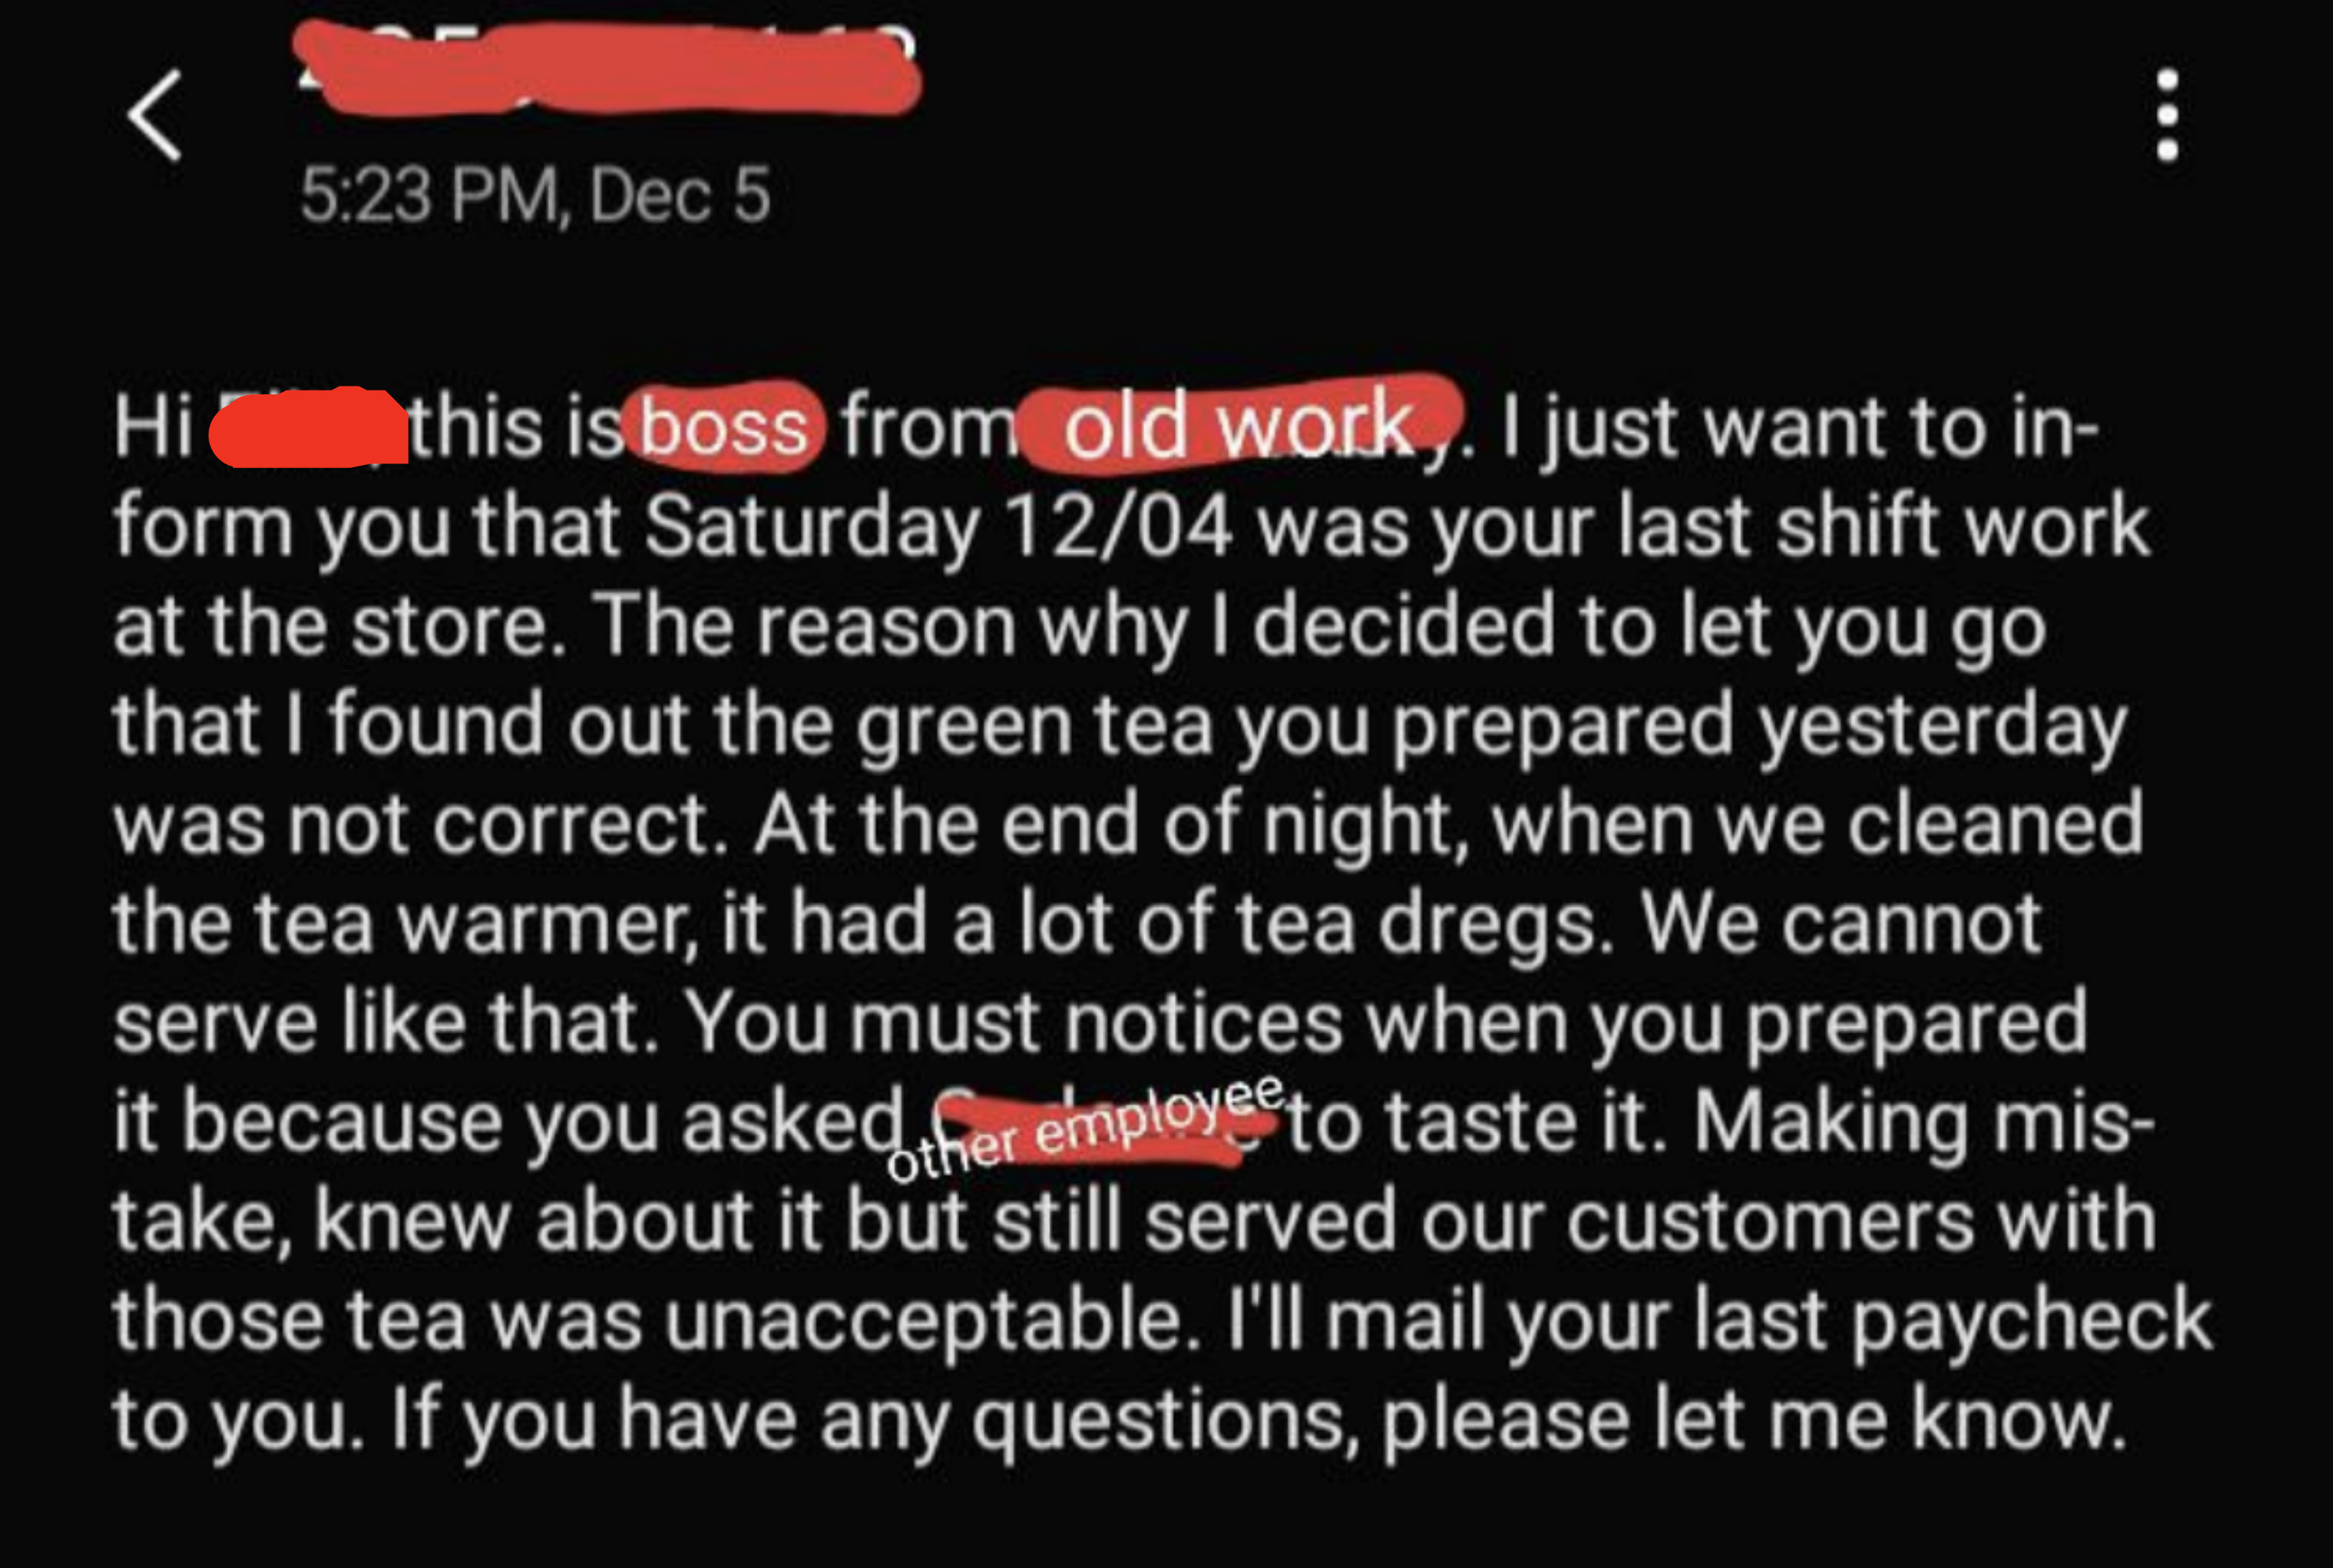 An email from a manager says an employee is being fired because they messed up a green tea order